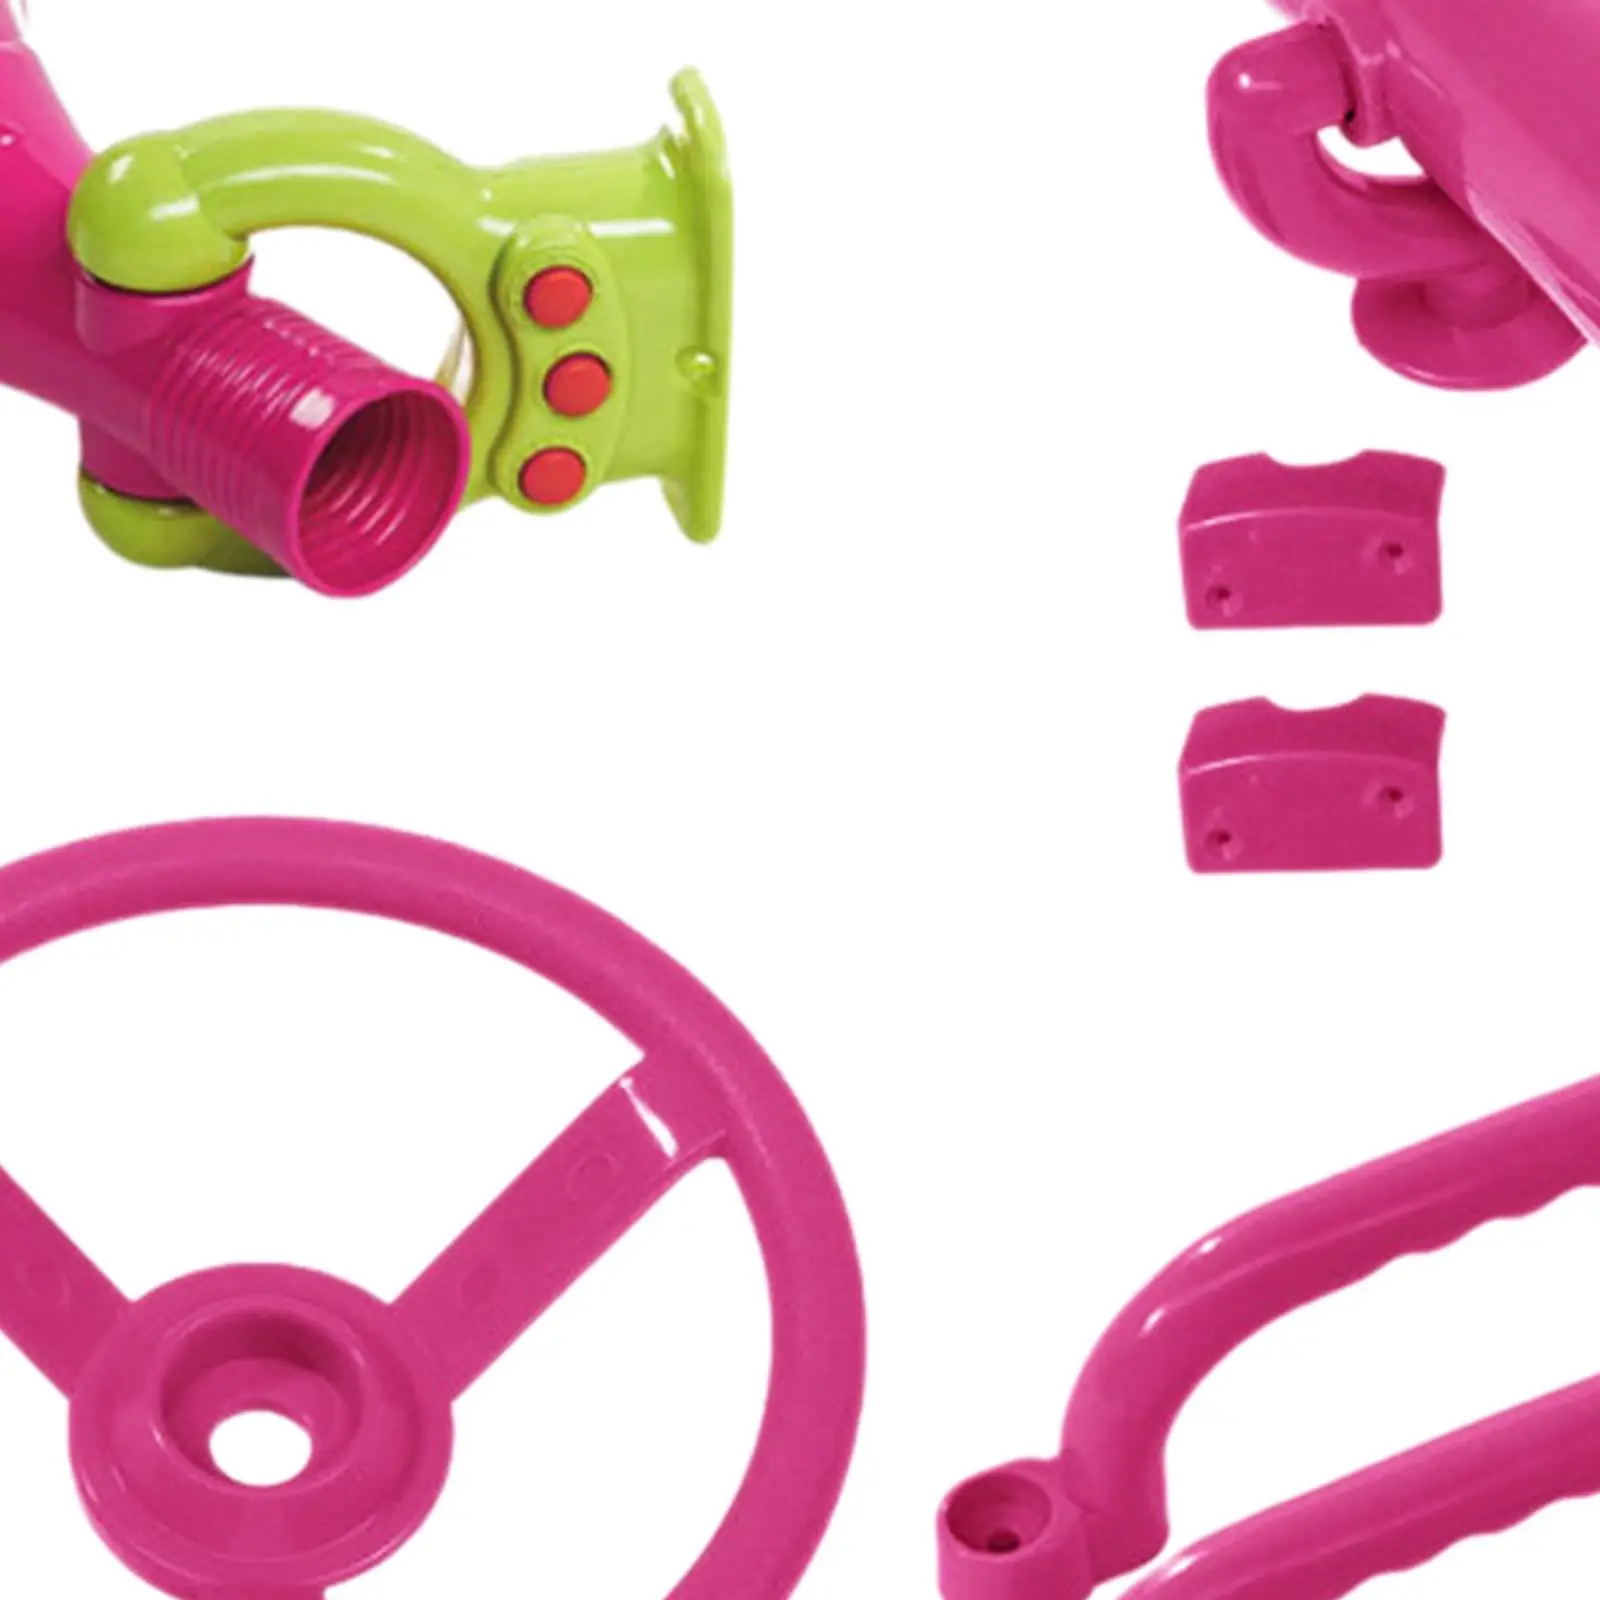 4x Playground Accessories Pink Parts Trumpet Playset Pirate Ship Wheel for Kids for Swingset Backyard Treehouse Ages 3 Older